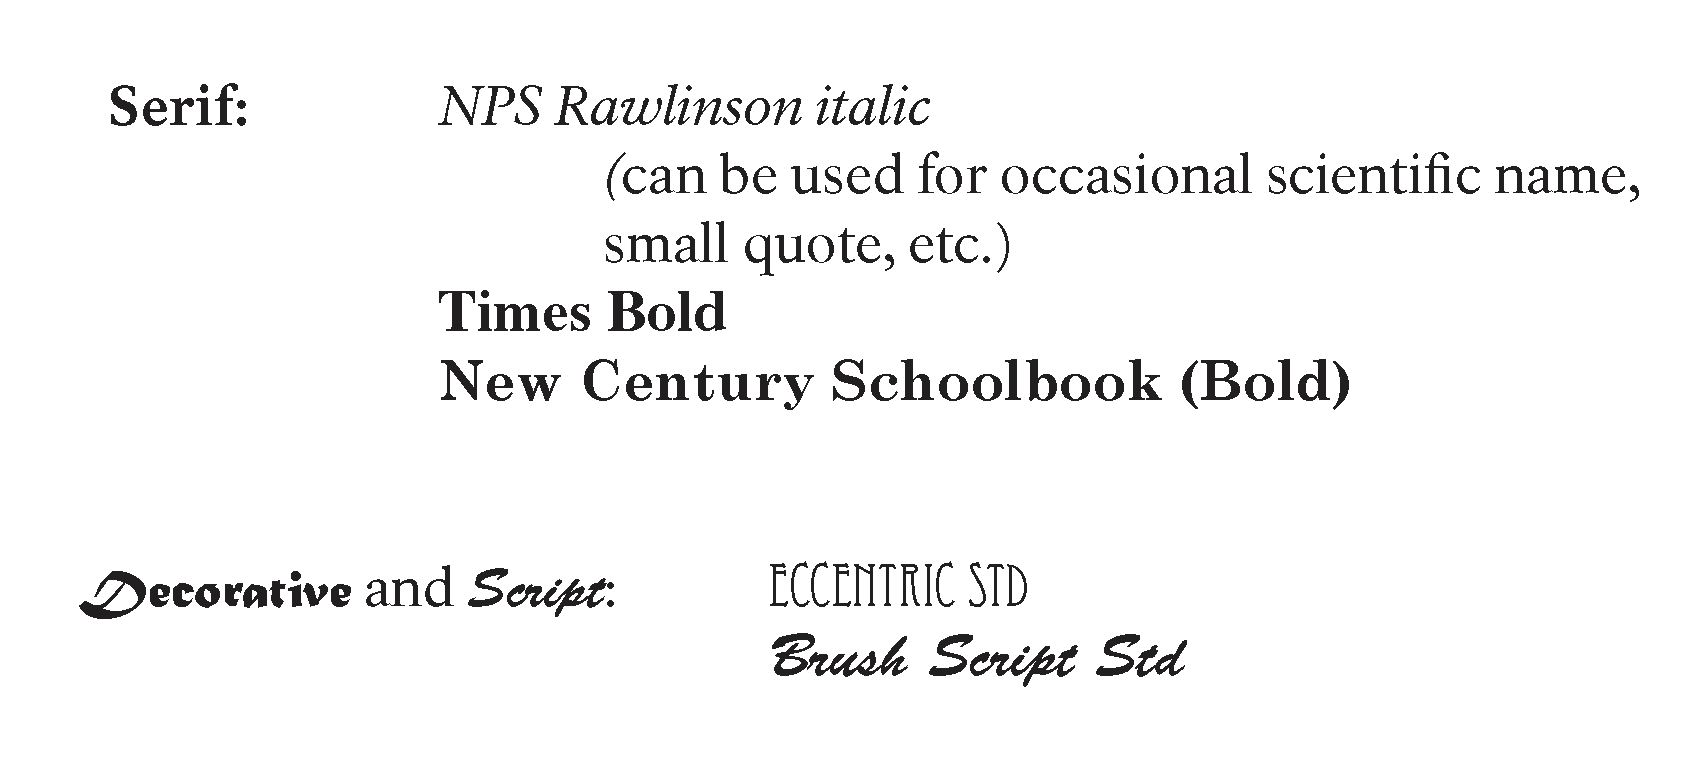 Each serif font listed above as non-accessible is presented in this image.